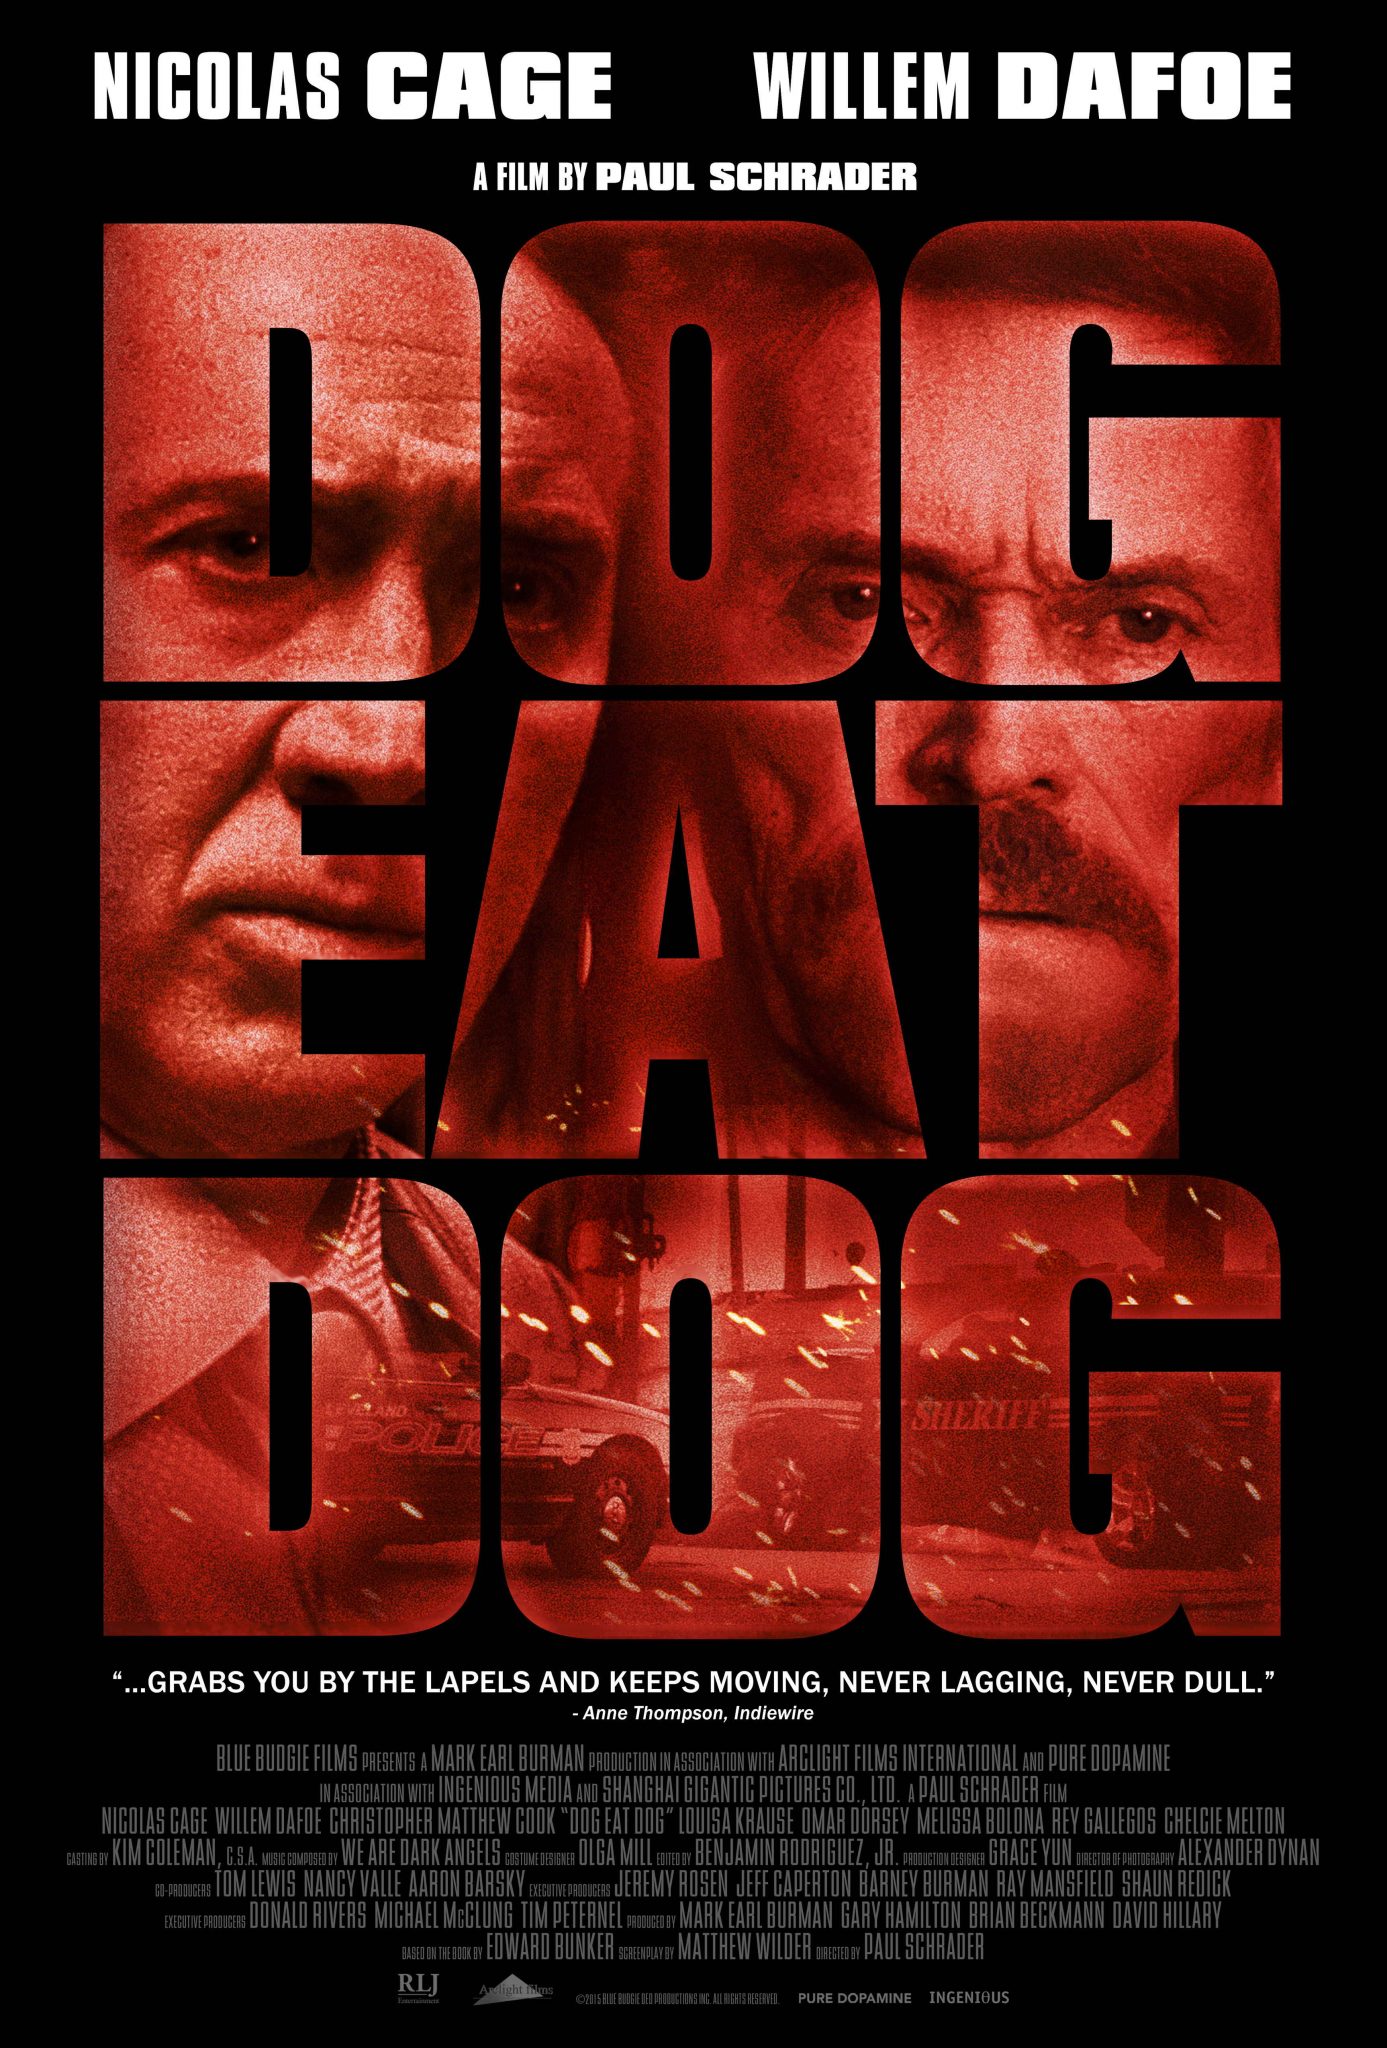 Dog Eat Dog (2016) Theatrical Poster